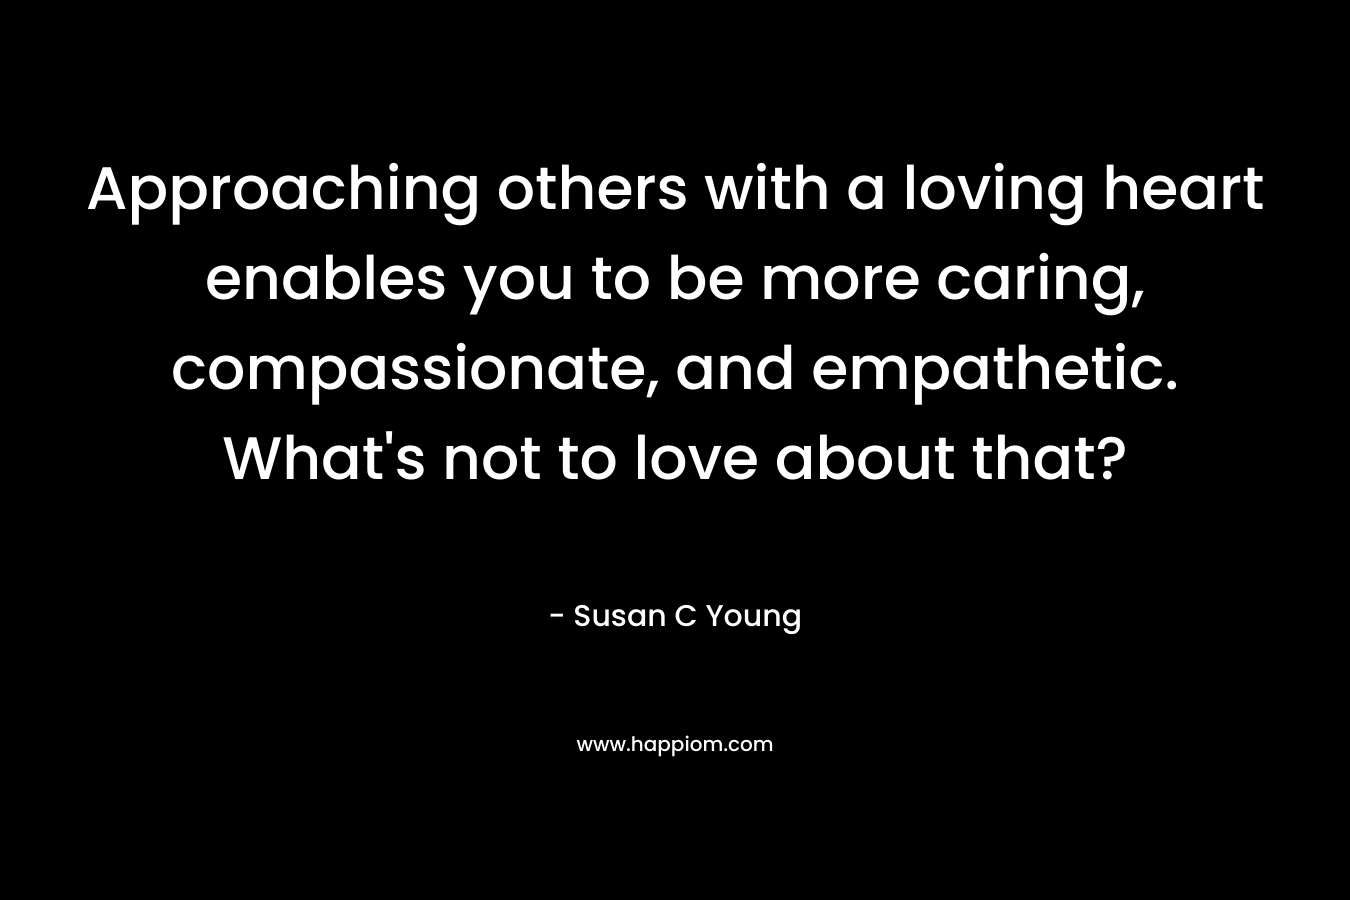 Approaching others with a loving heart enables you to be more caring, compassionate, and empathetic. What’s not to love about that? – Susan C Young